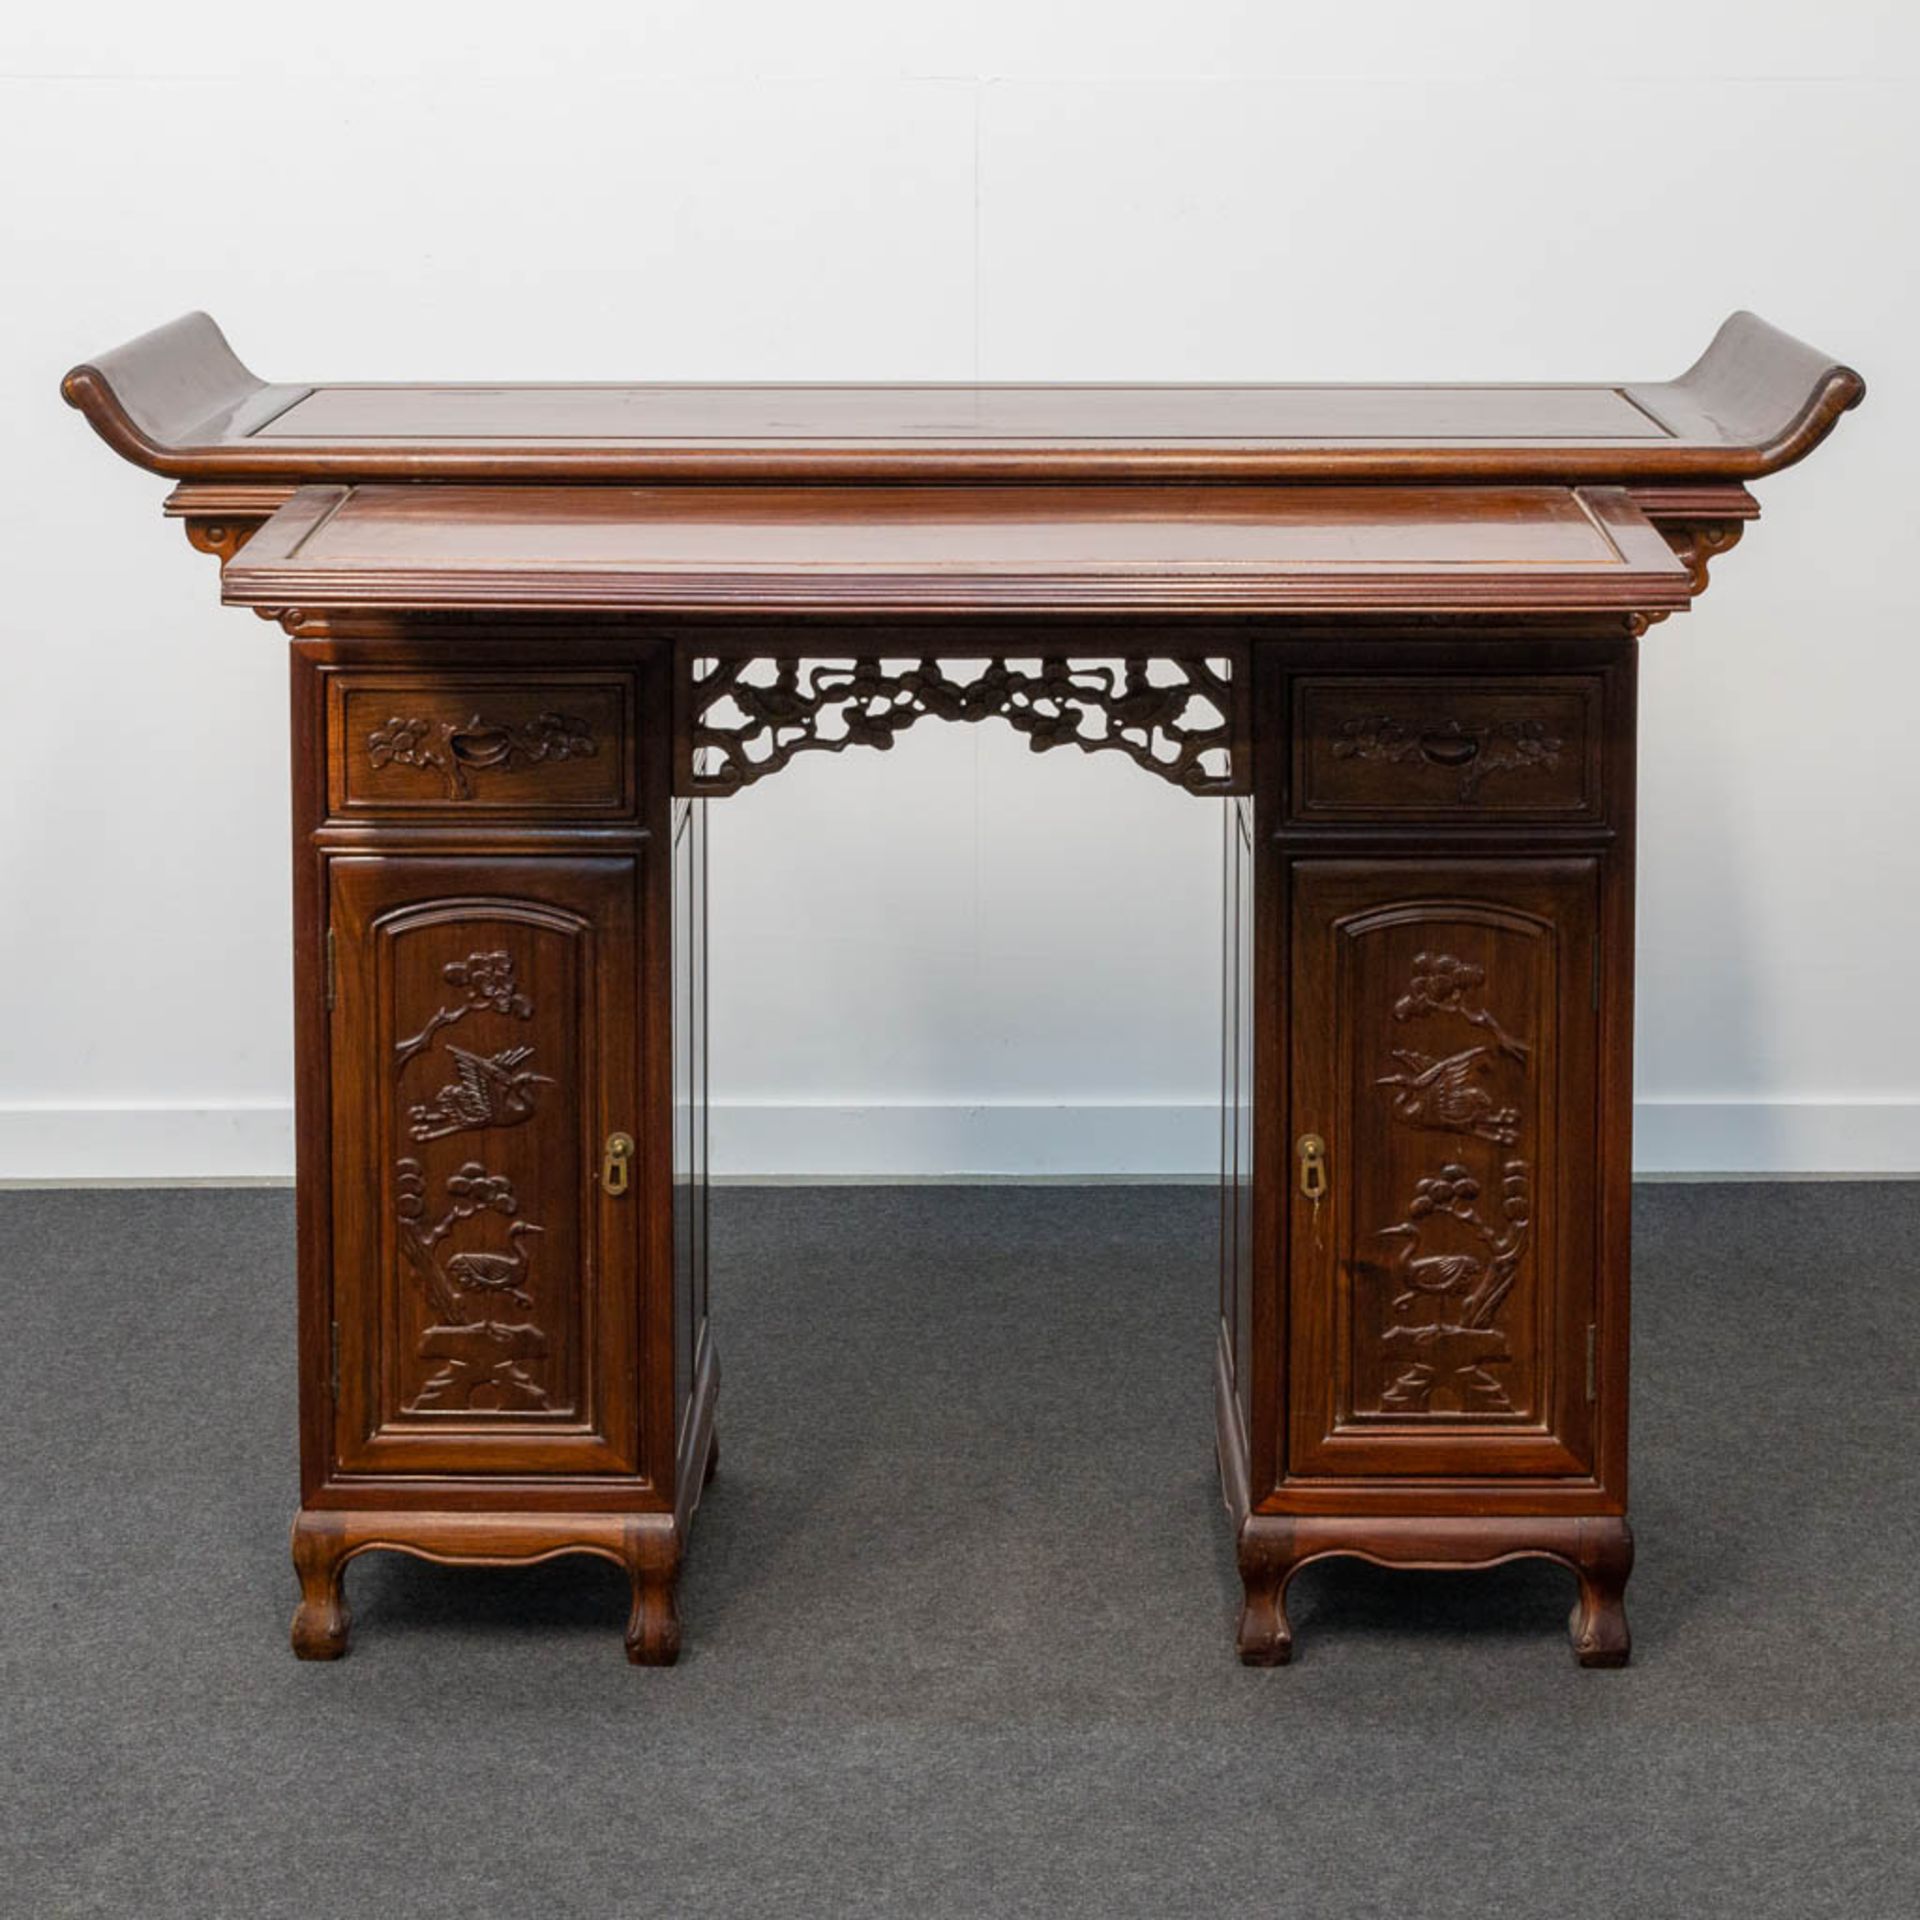 A Chinese hardwood Scroll Desk - Image 12 of 23